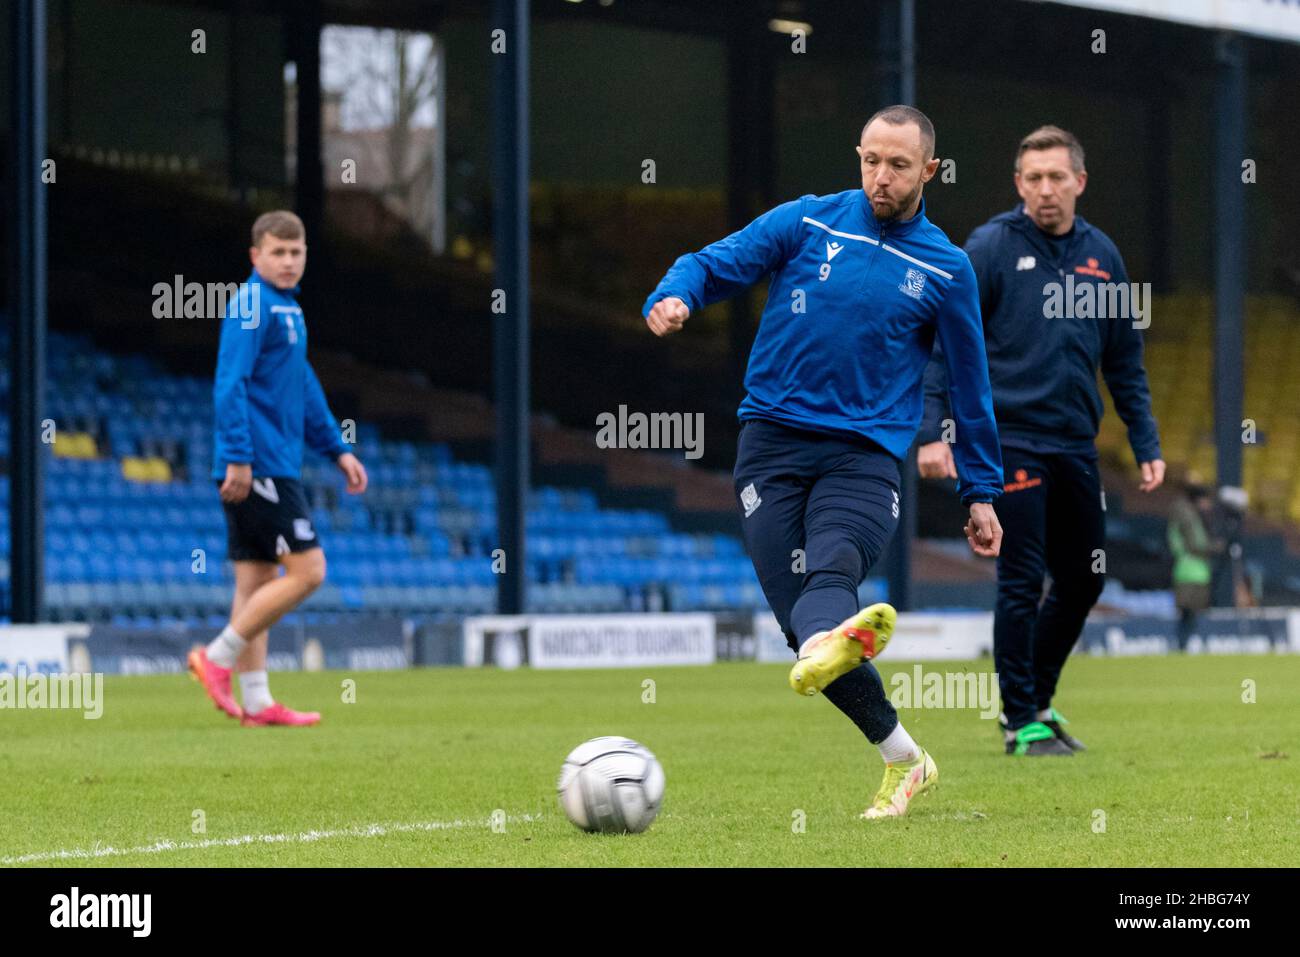 Rhys Murphy warming up before playing for Southend in the FA Trophy 3rd round at Roots Hall, Southend United v Dorking Wanderers football match Stock Photo